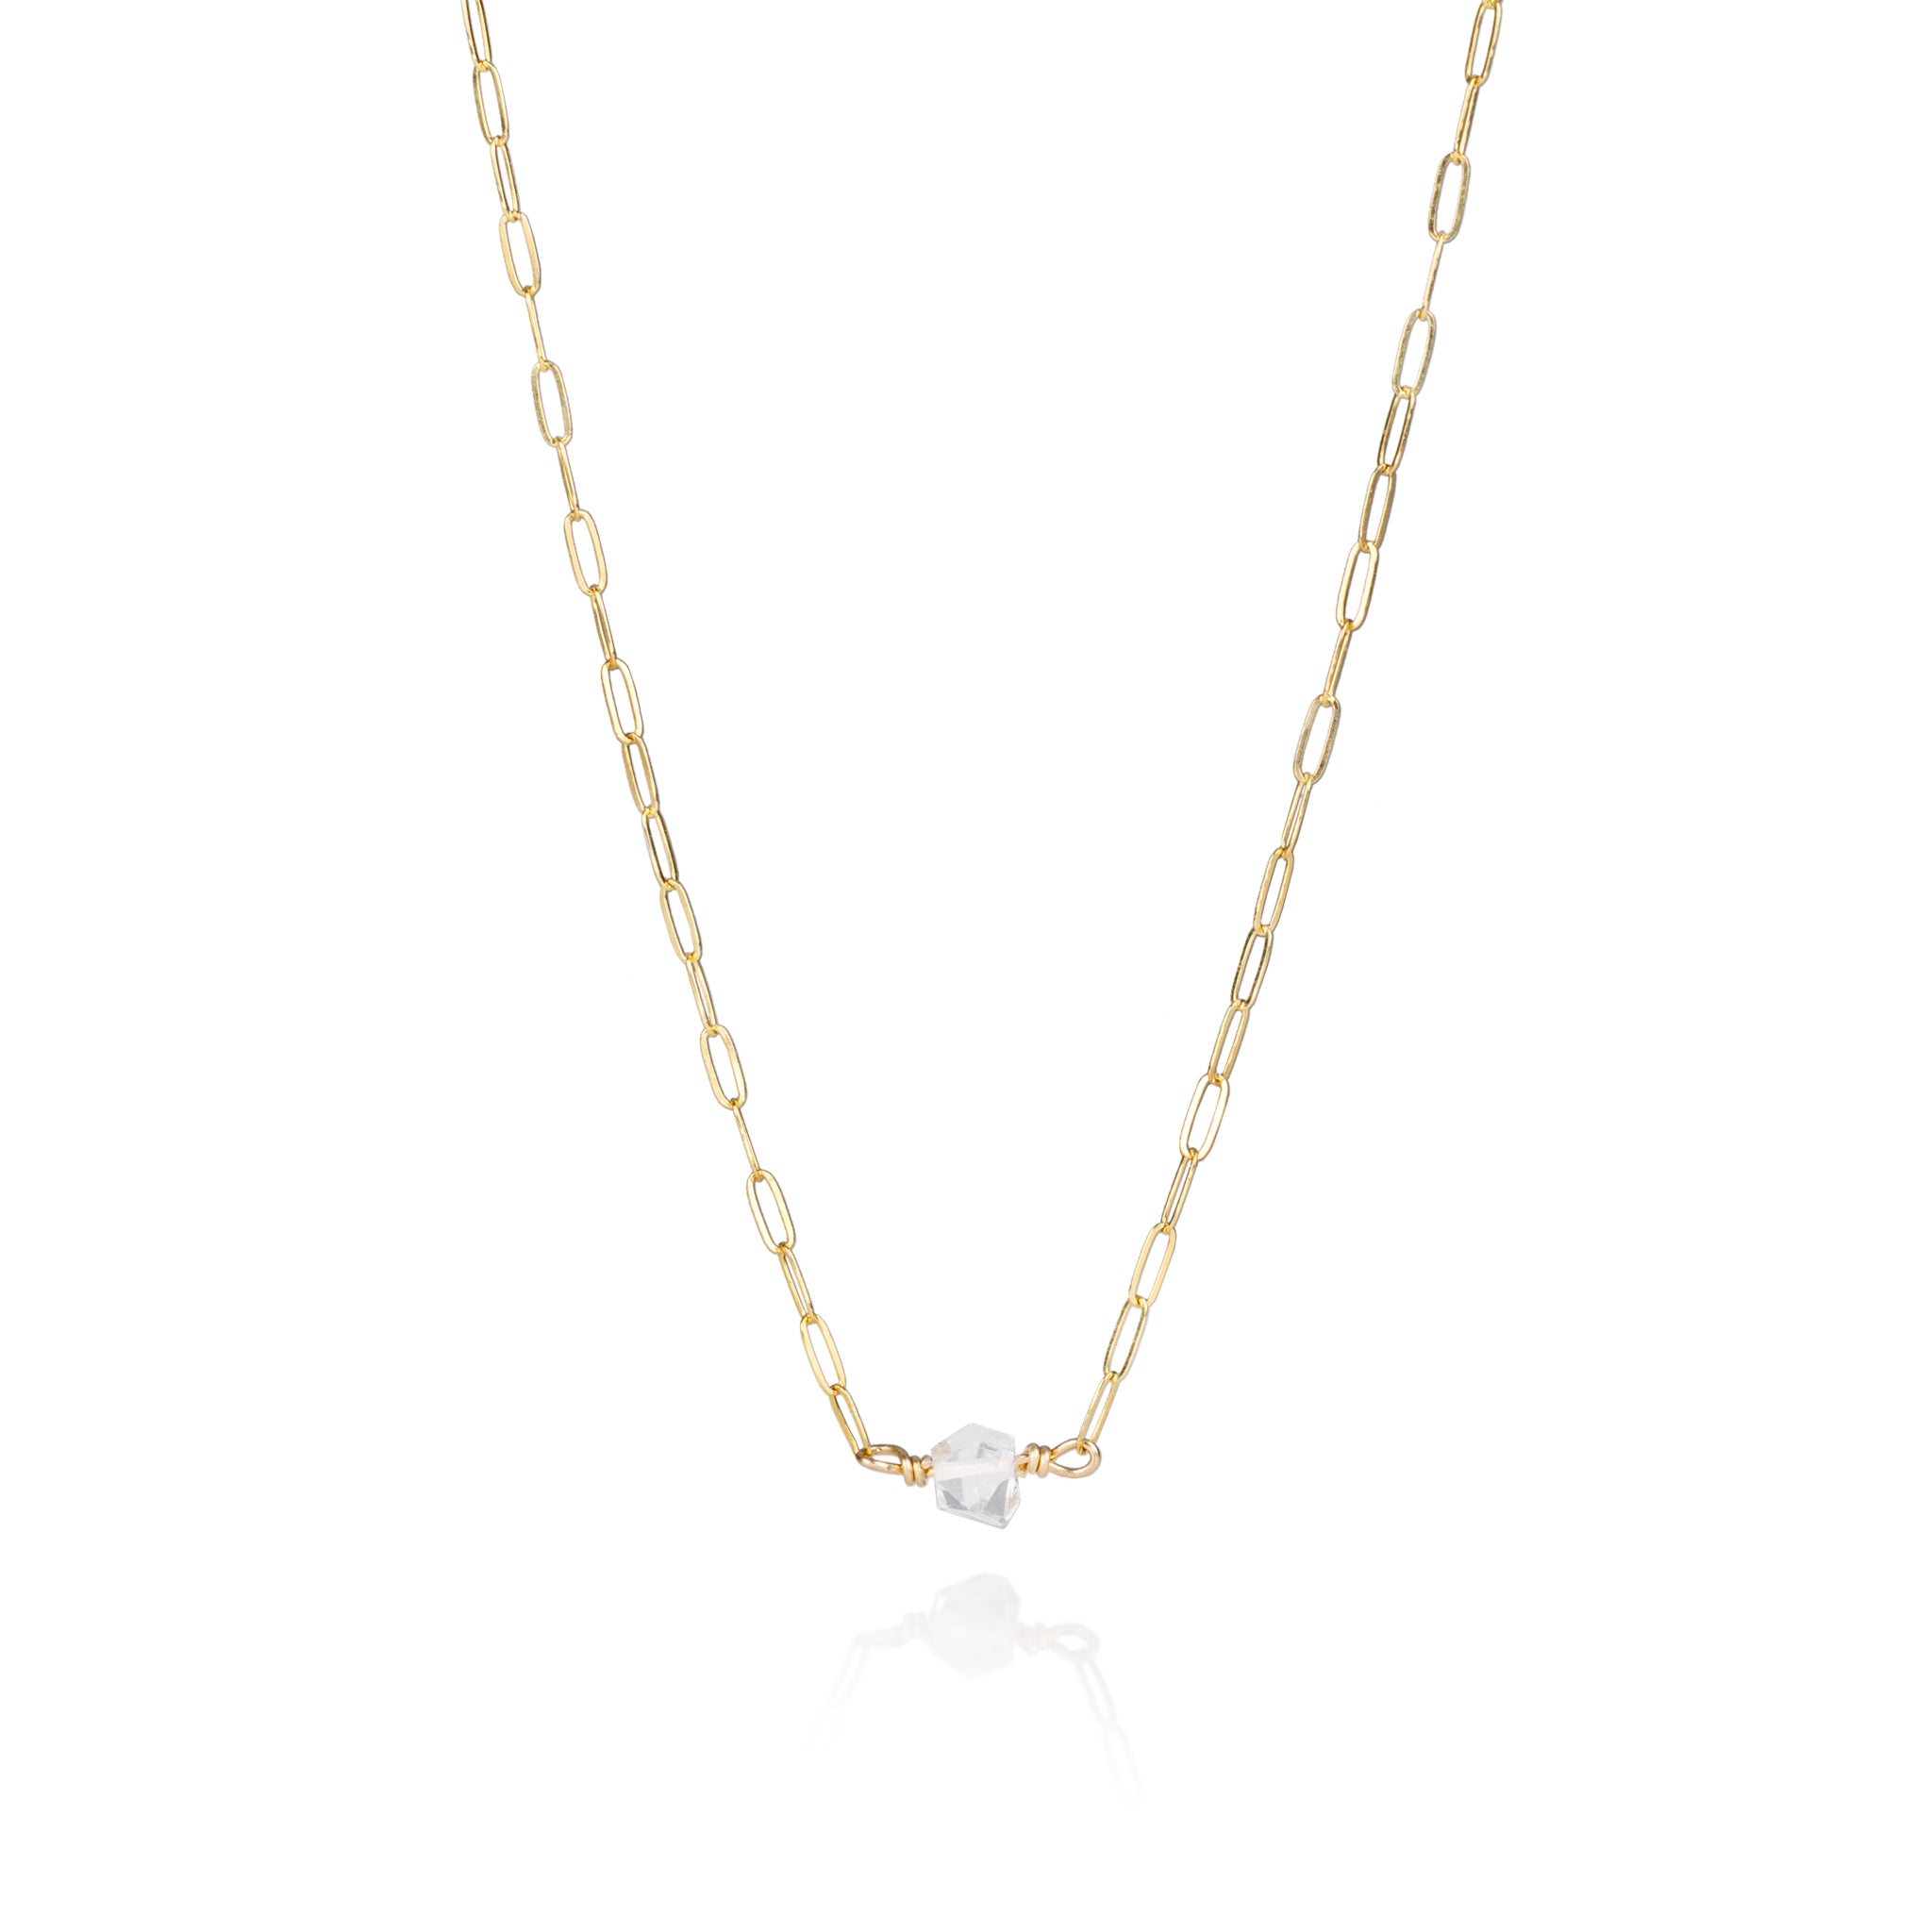 Candice Gold Chain with Herkimer Diamond